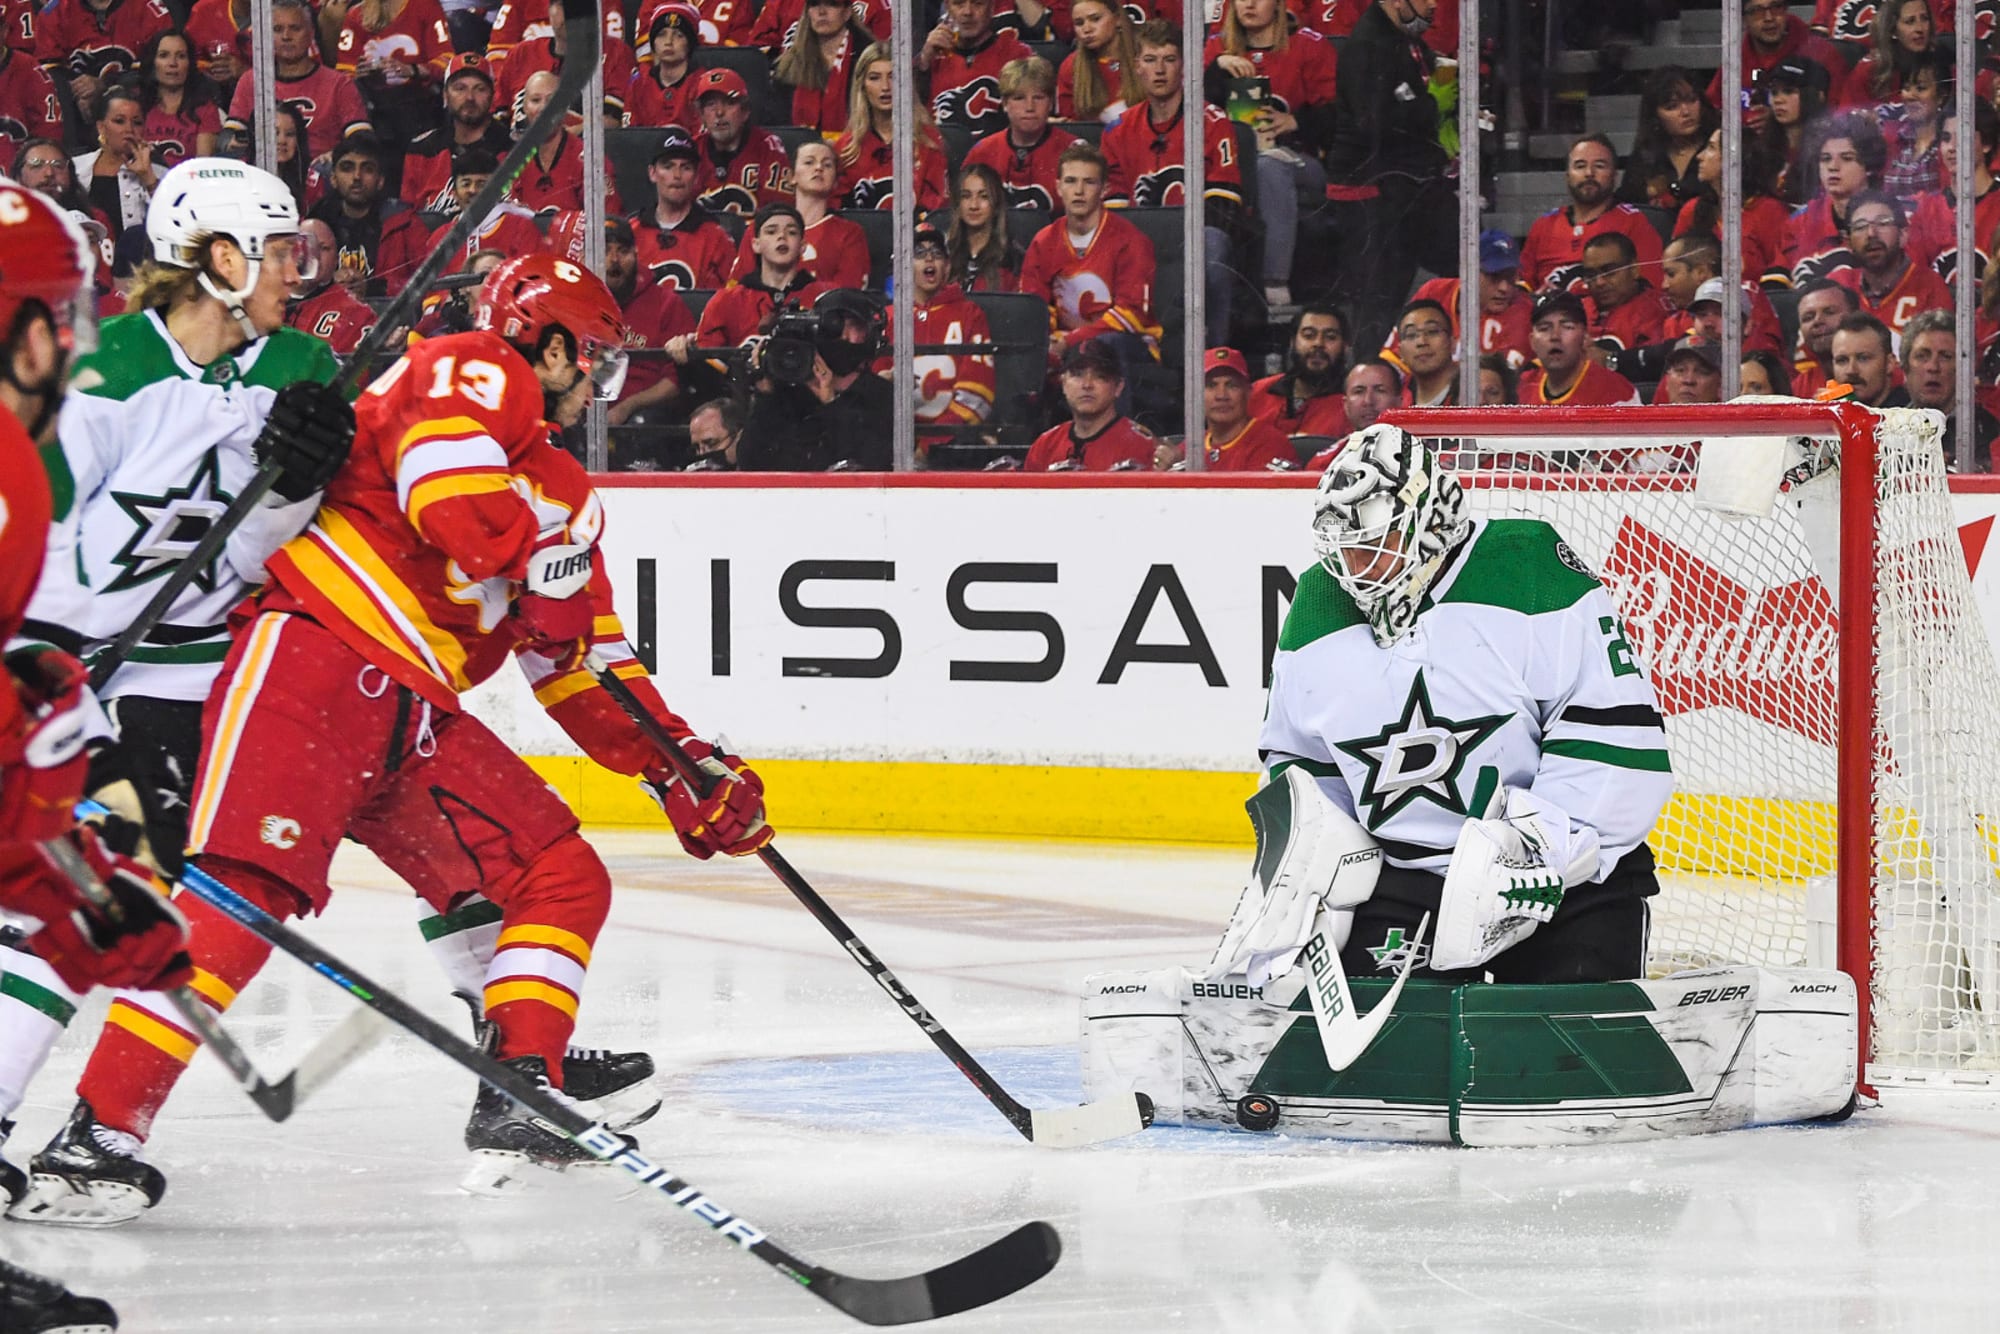 The Dallas Stars also exposed a big mistake made by Chicago Blackhawks